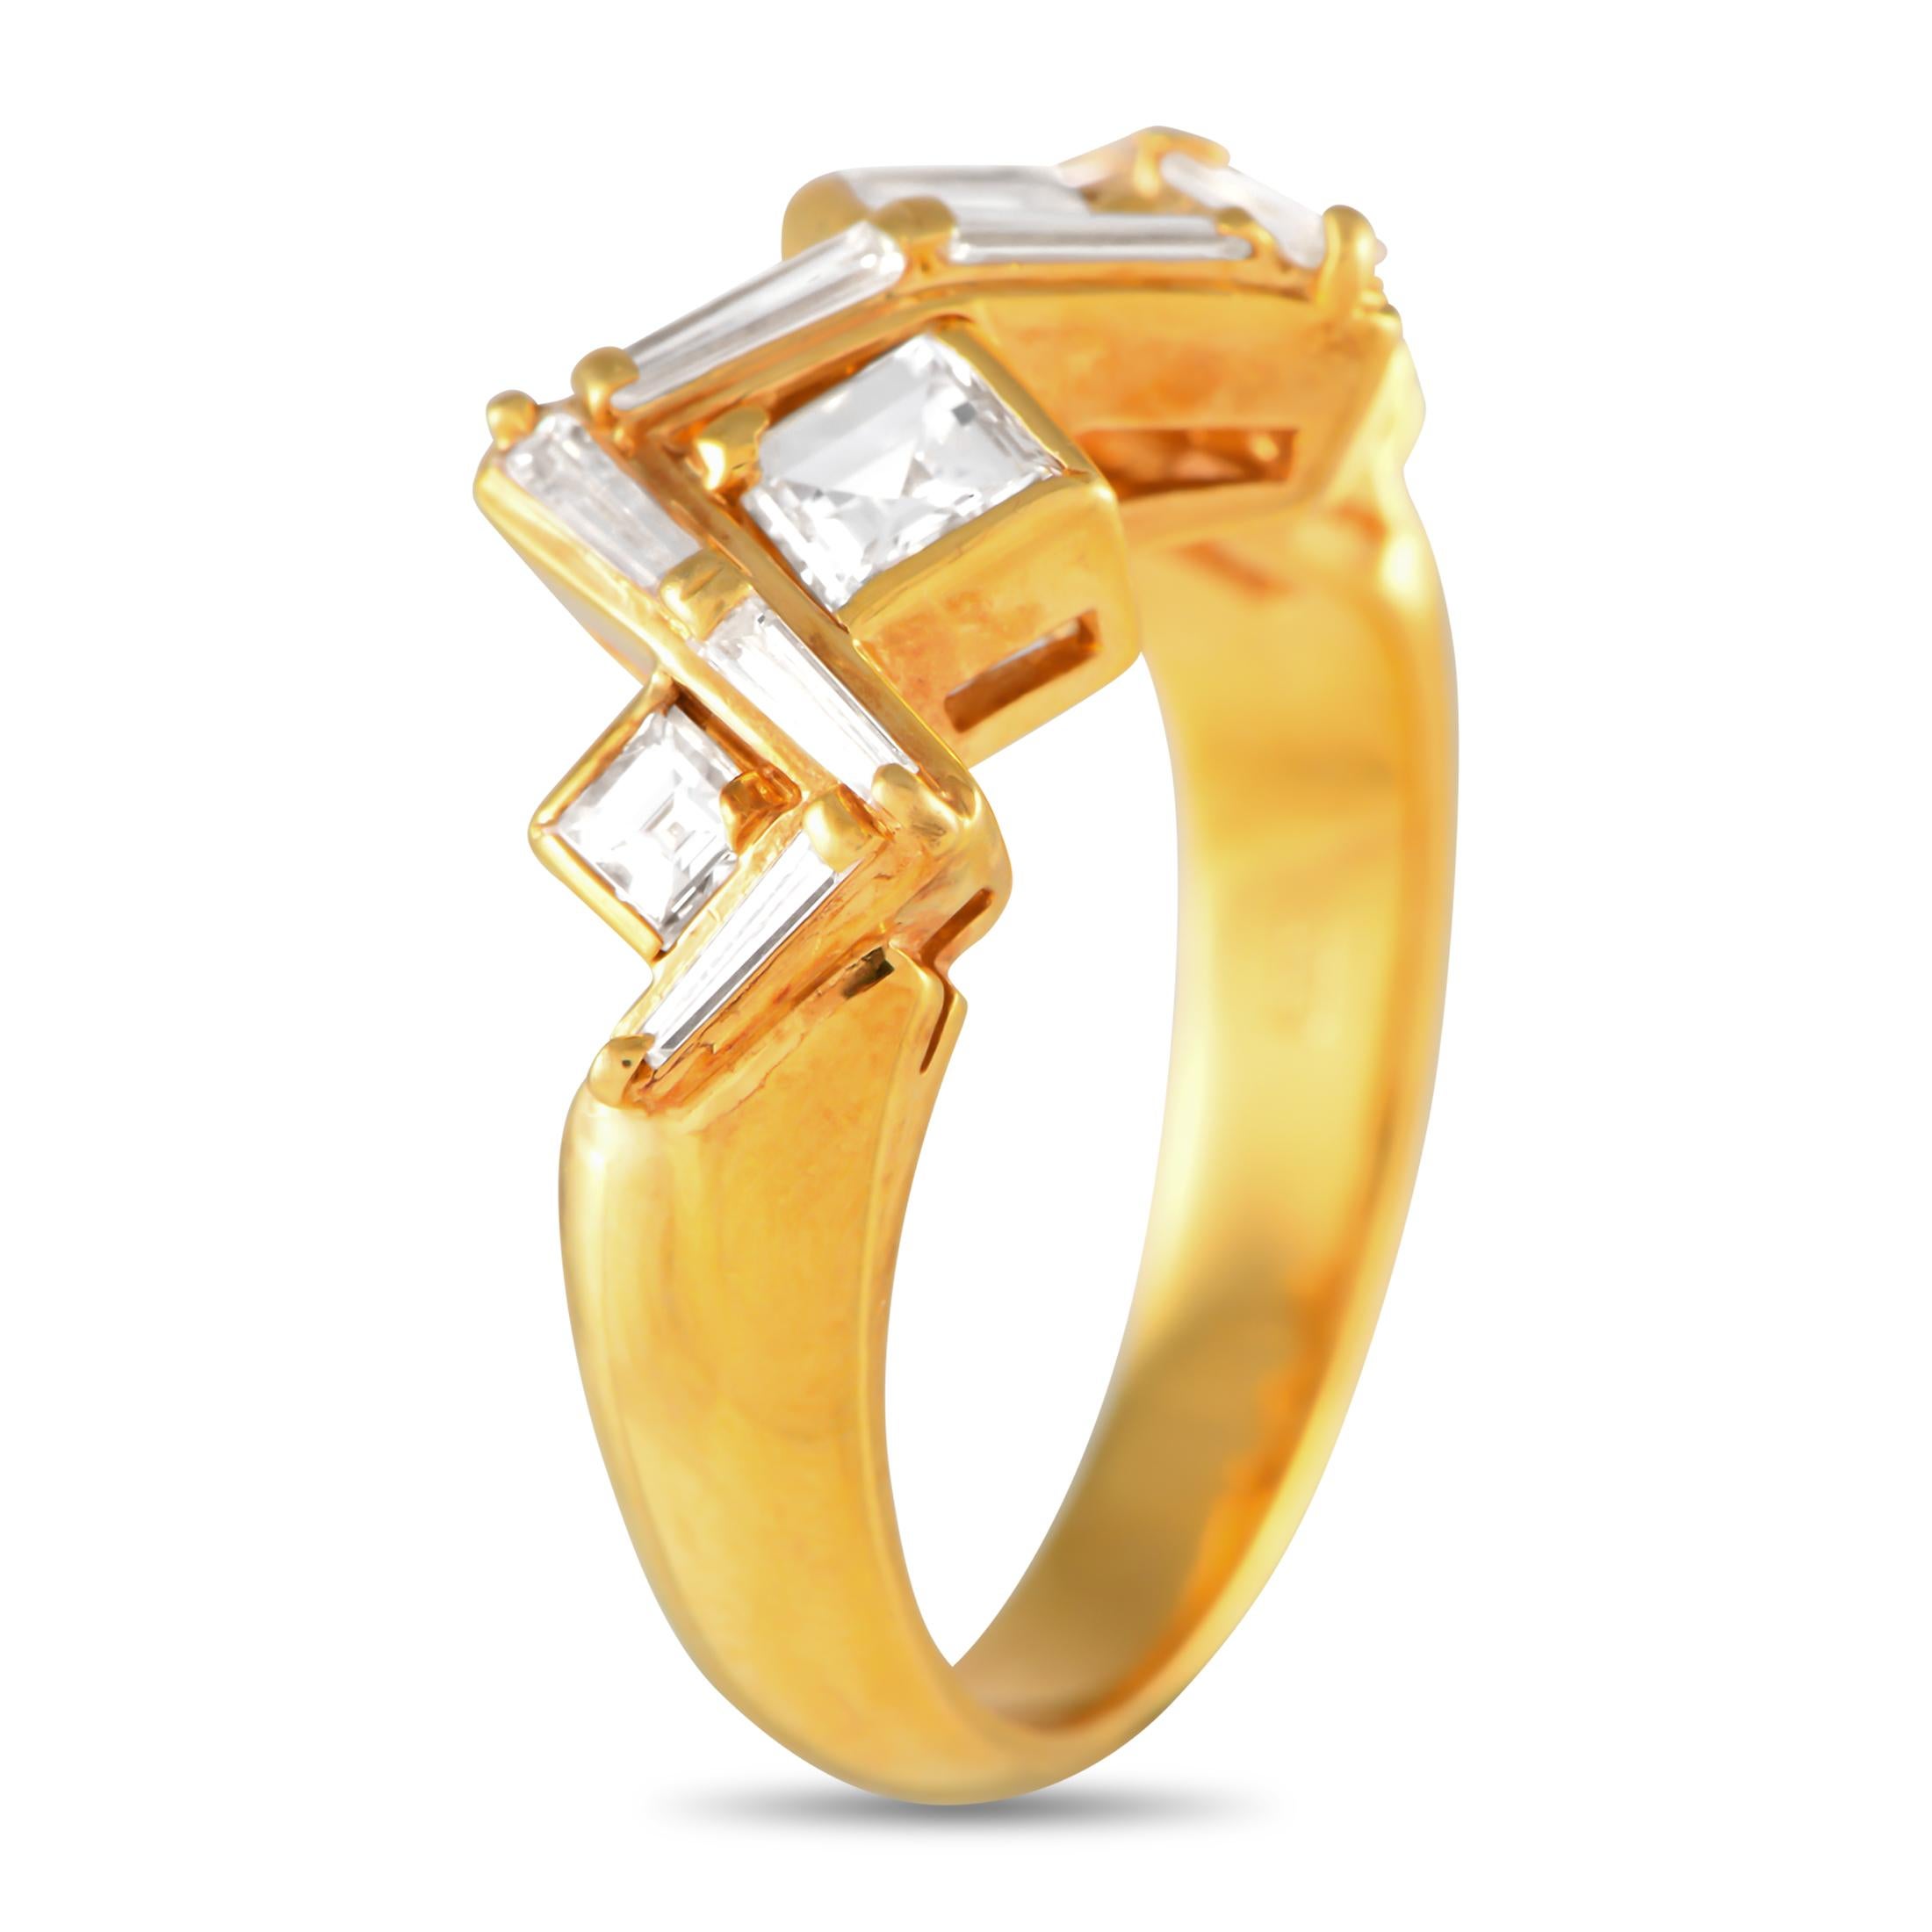 An exquisite arrangement of diamonds totaling 1.04 carats add visual impact to this rings striking 18K yellow gold setting. Ideal for any occasion, this piece features a 3mm wide band and a 5mm top height.This jewelry piece is offered in estate